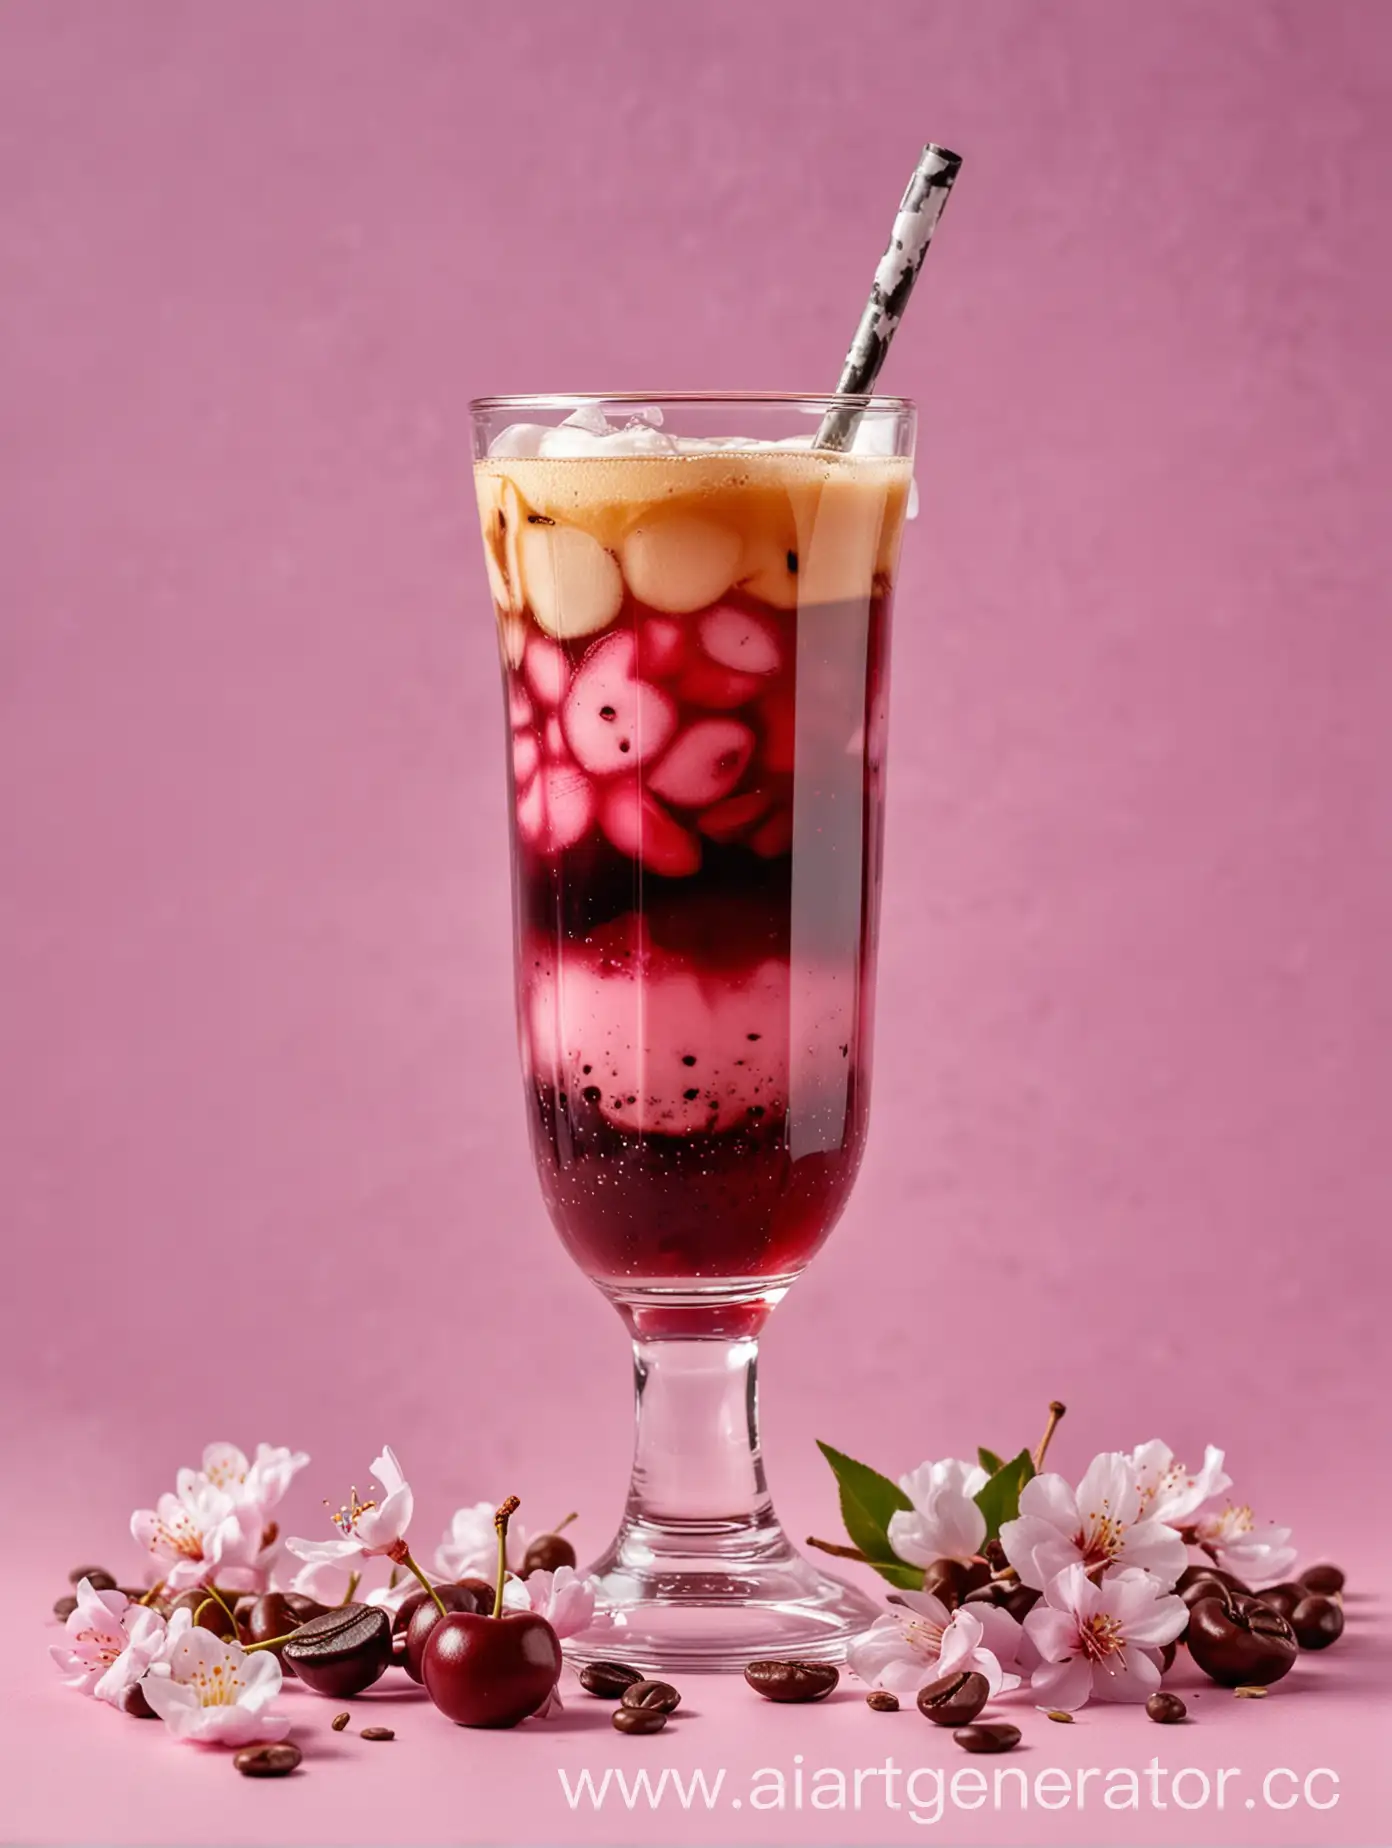 Refreshing-Layered-Espresso-Cold-Drink-with-Cherry-Accents